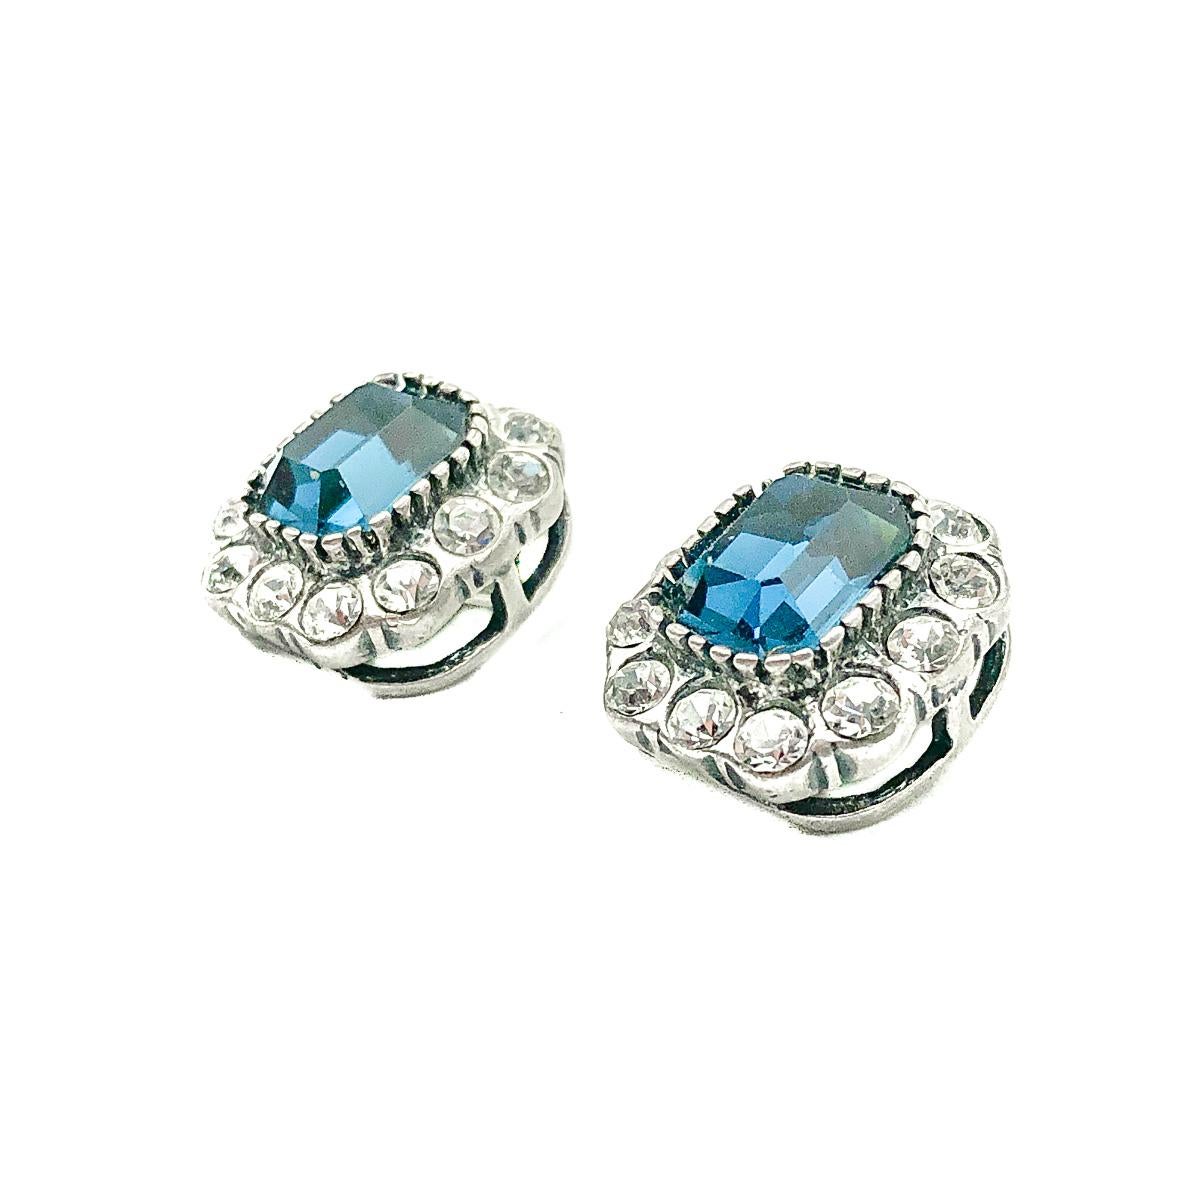 A beautiful pair of Vintage Italian Sapphire Earrings. Crafted in 925 Sterling Silver with paste glass stones in sapphire and white colours. In very good vintage condition, Italian hallmark, approx. 1.6cms. A delightfully classic and chic pair of